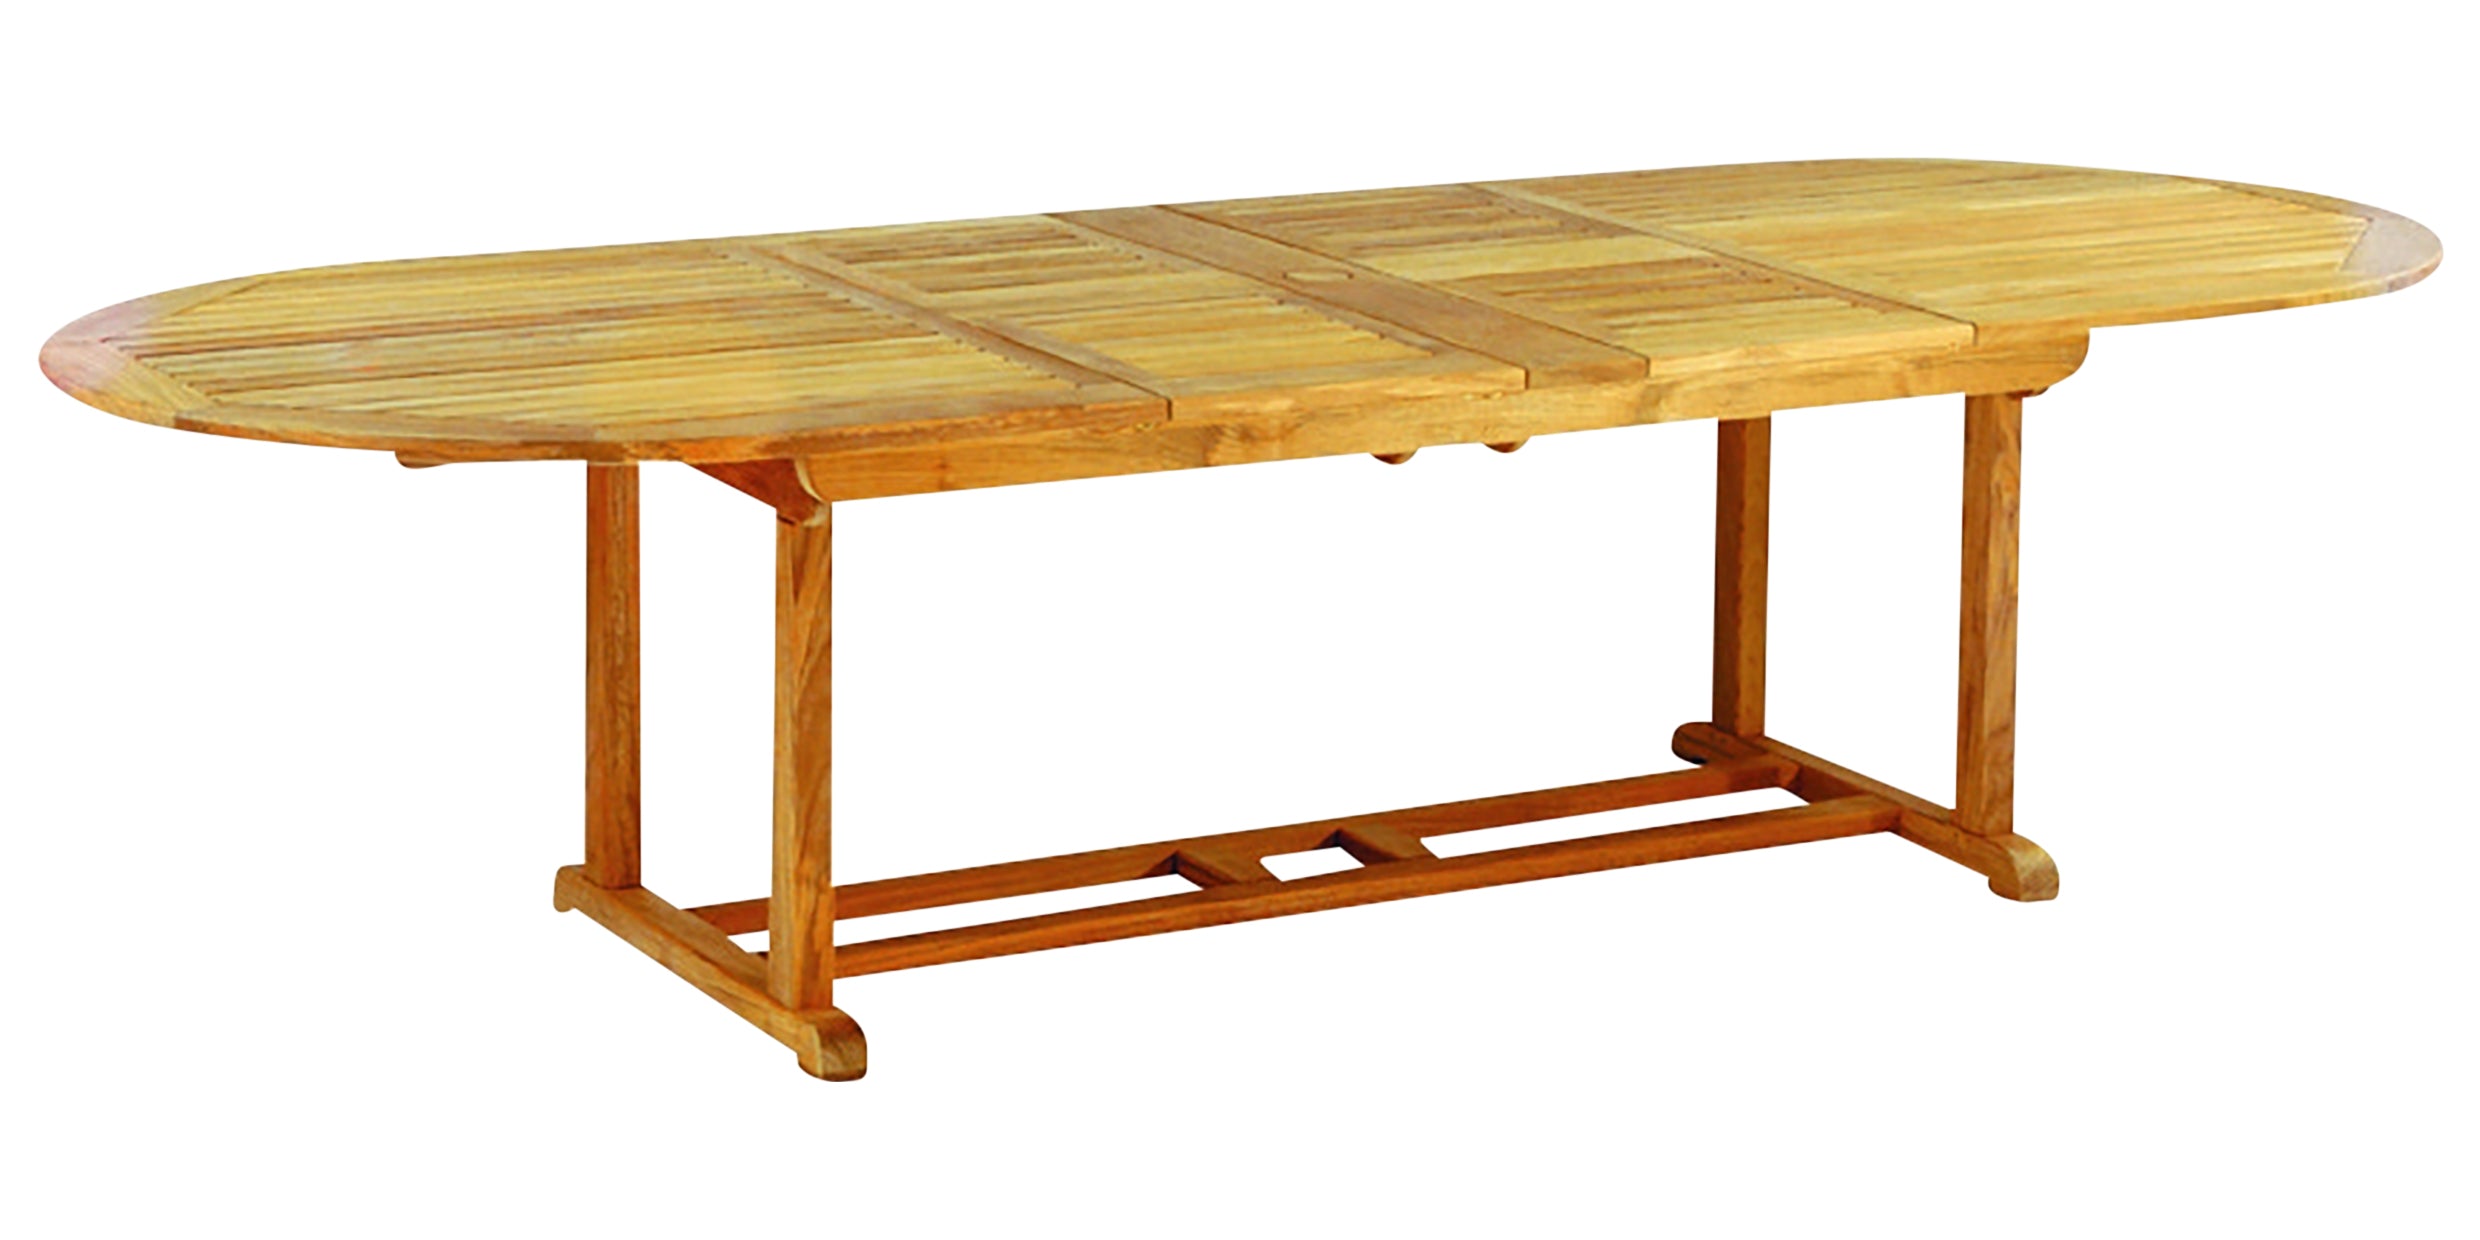 114in Oval Extension Table | Kingsley Bate Essex Collection | Valley Ridge Furniture